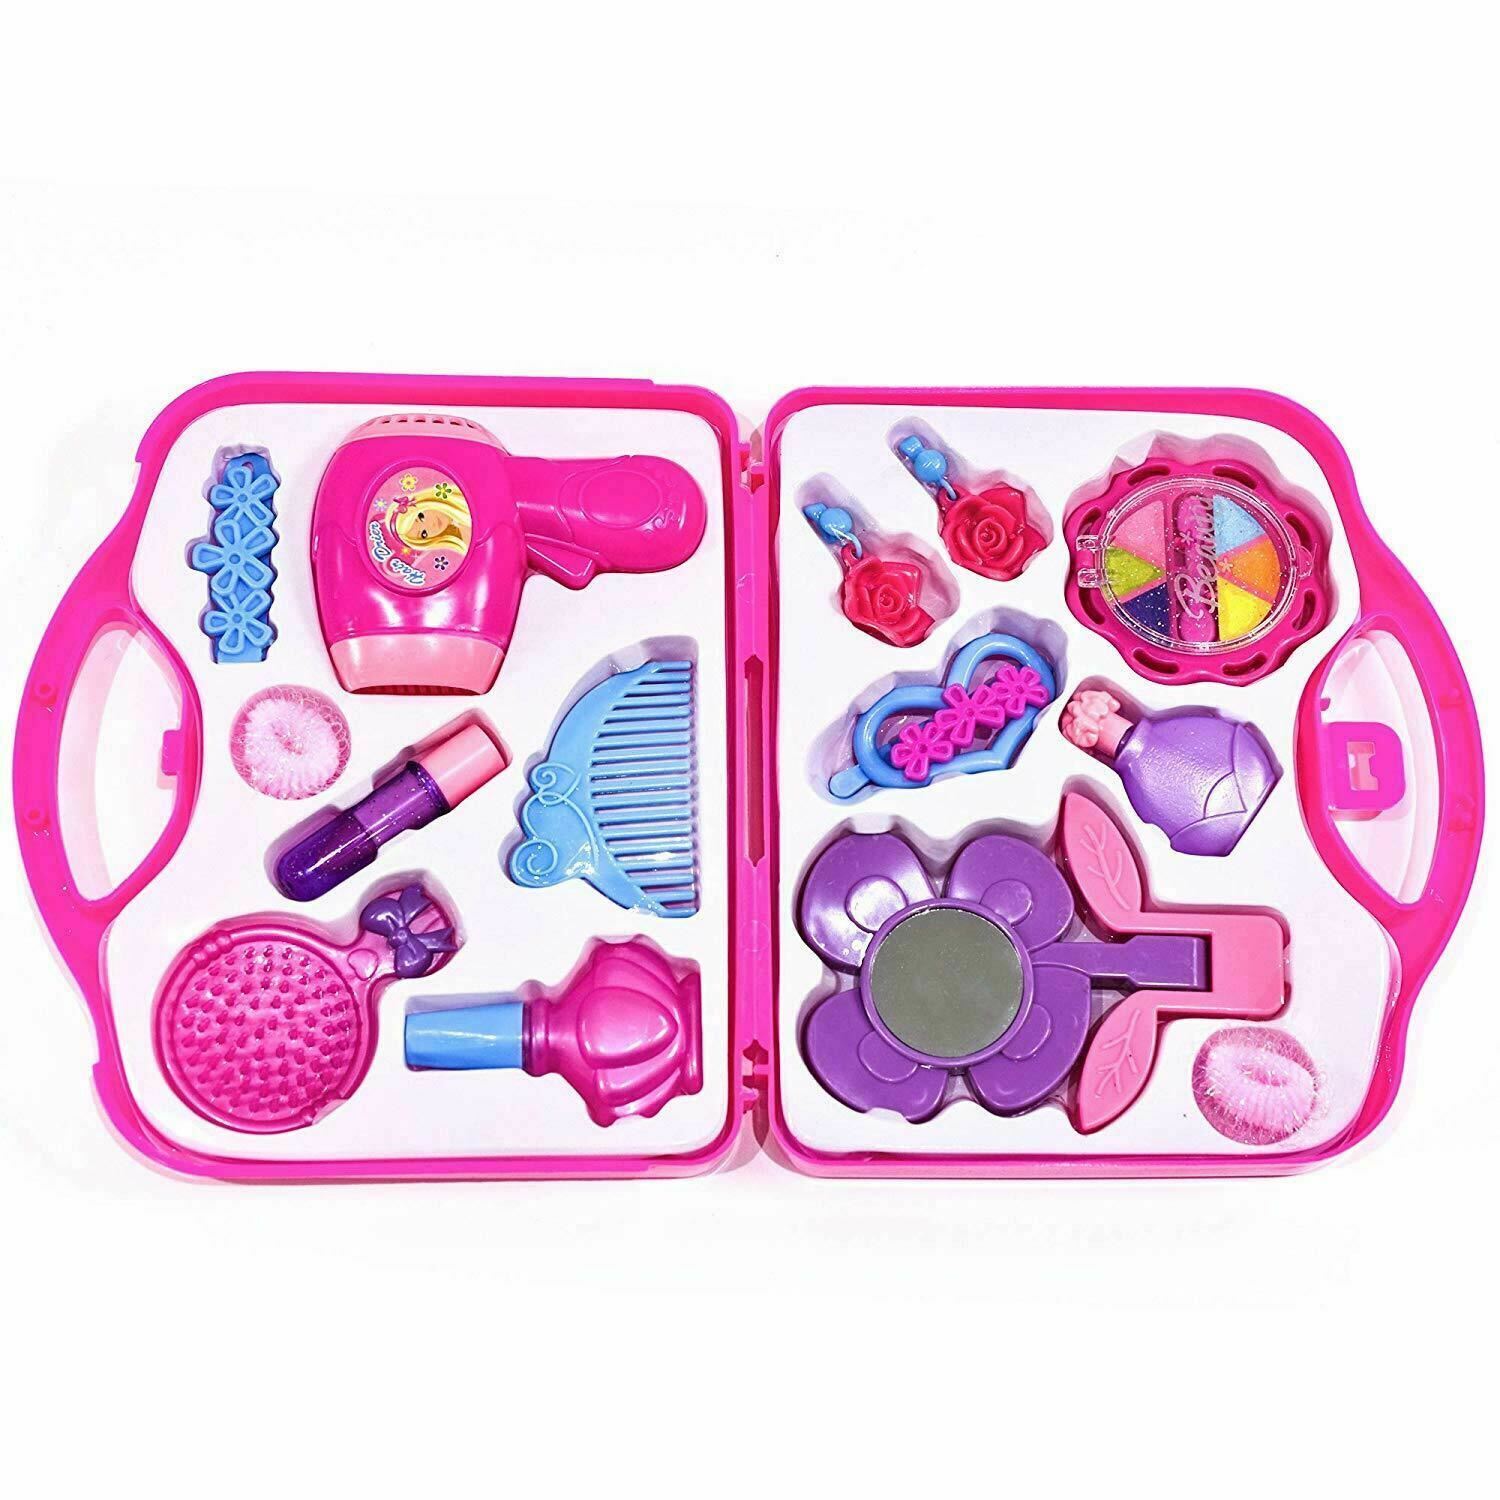 Vanity Beauty Cosmetic Bag The Magic Toy Shop - The Magic Toy Shop